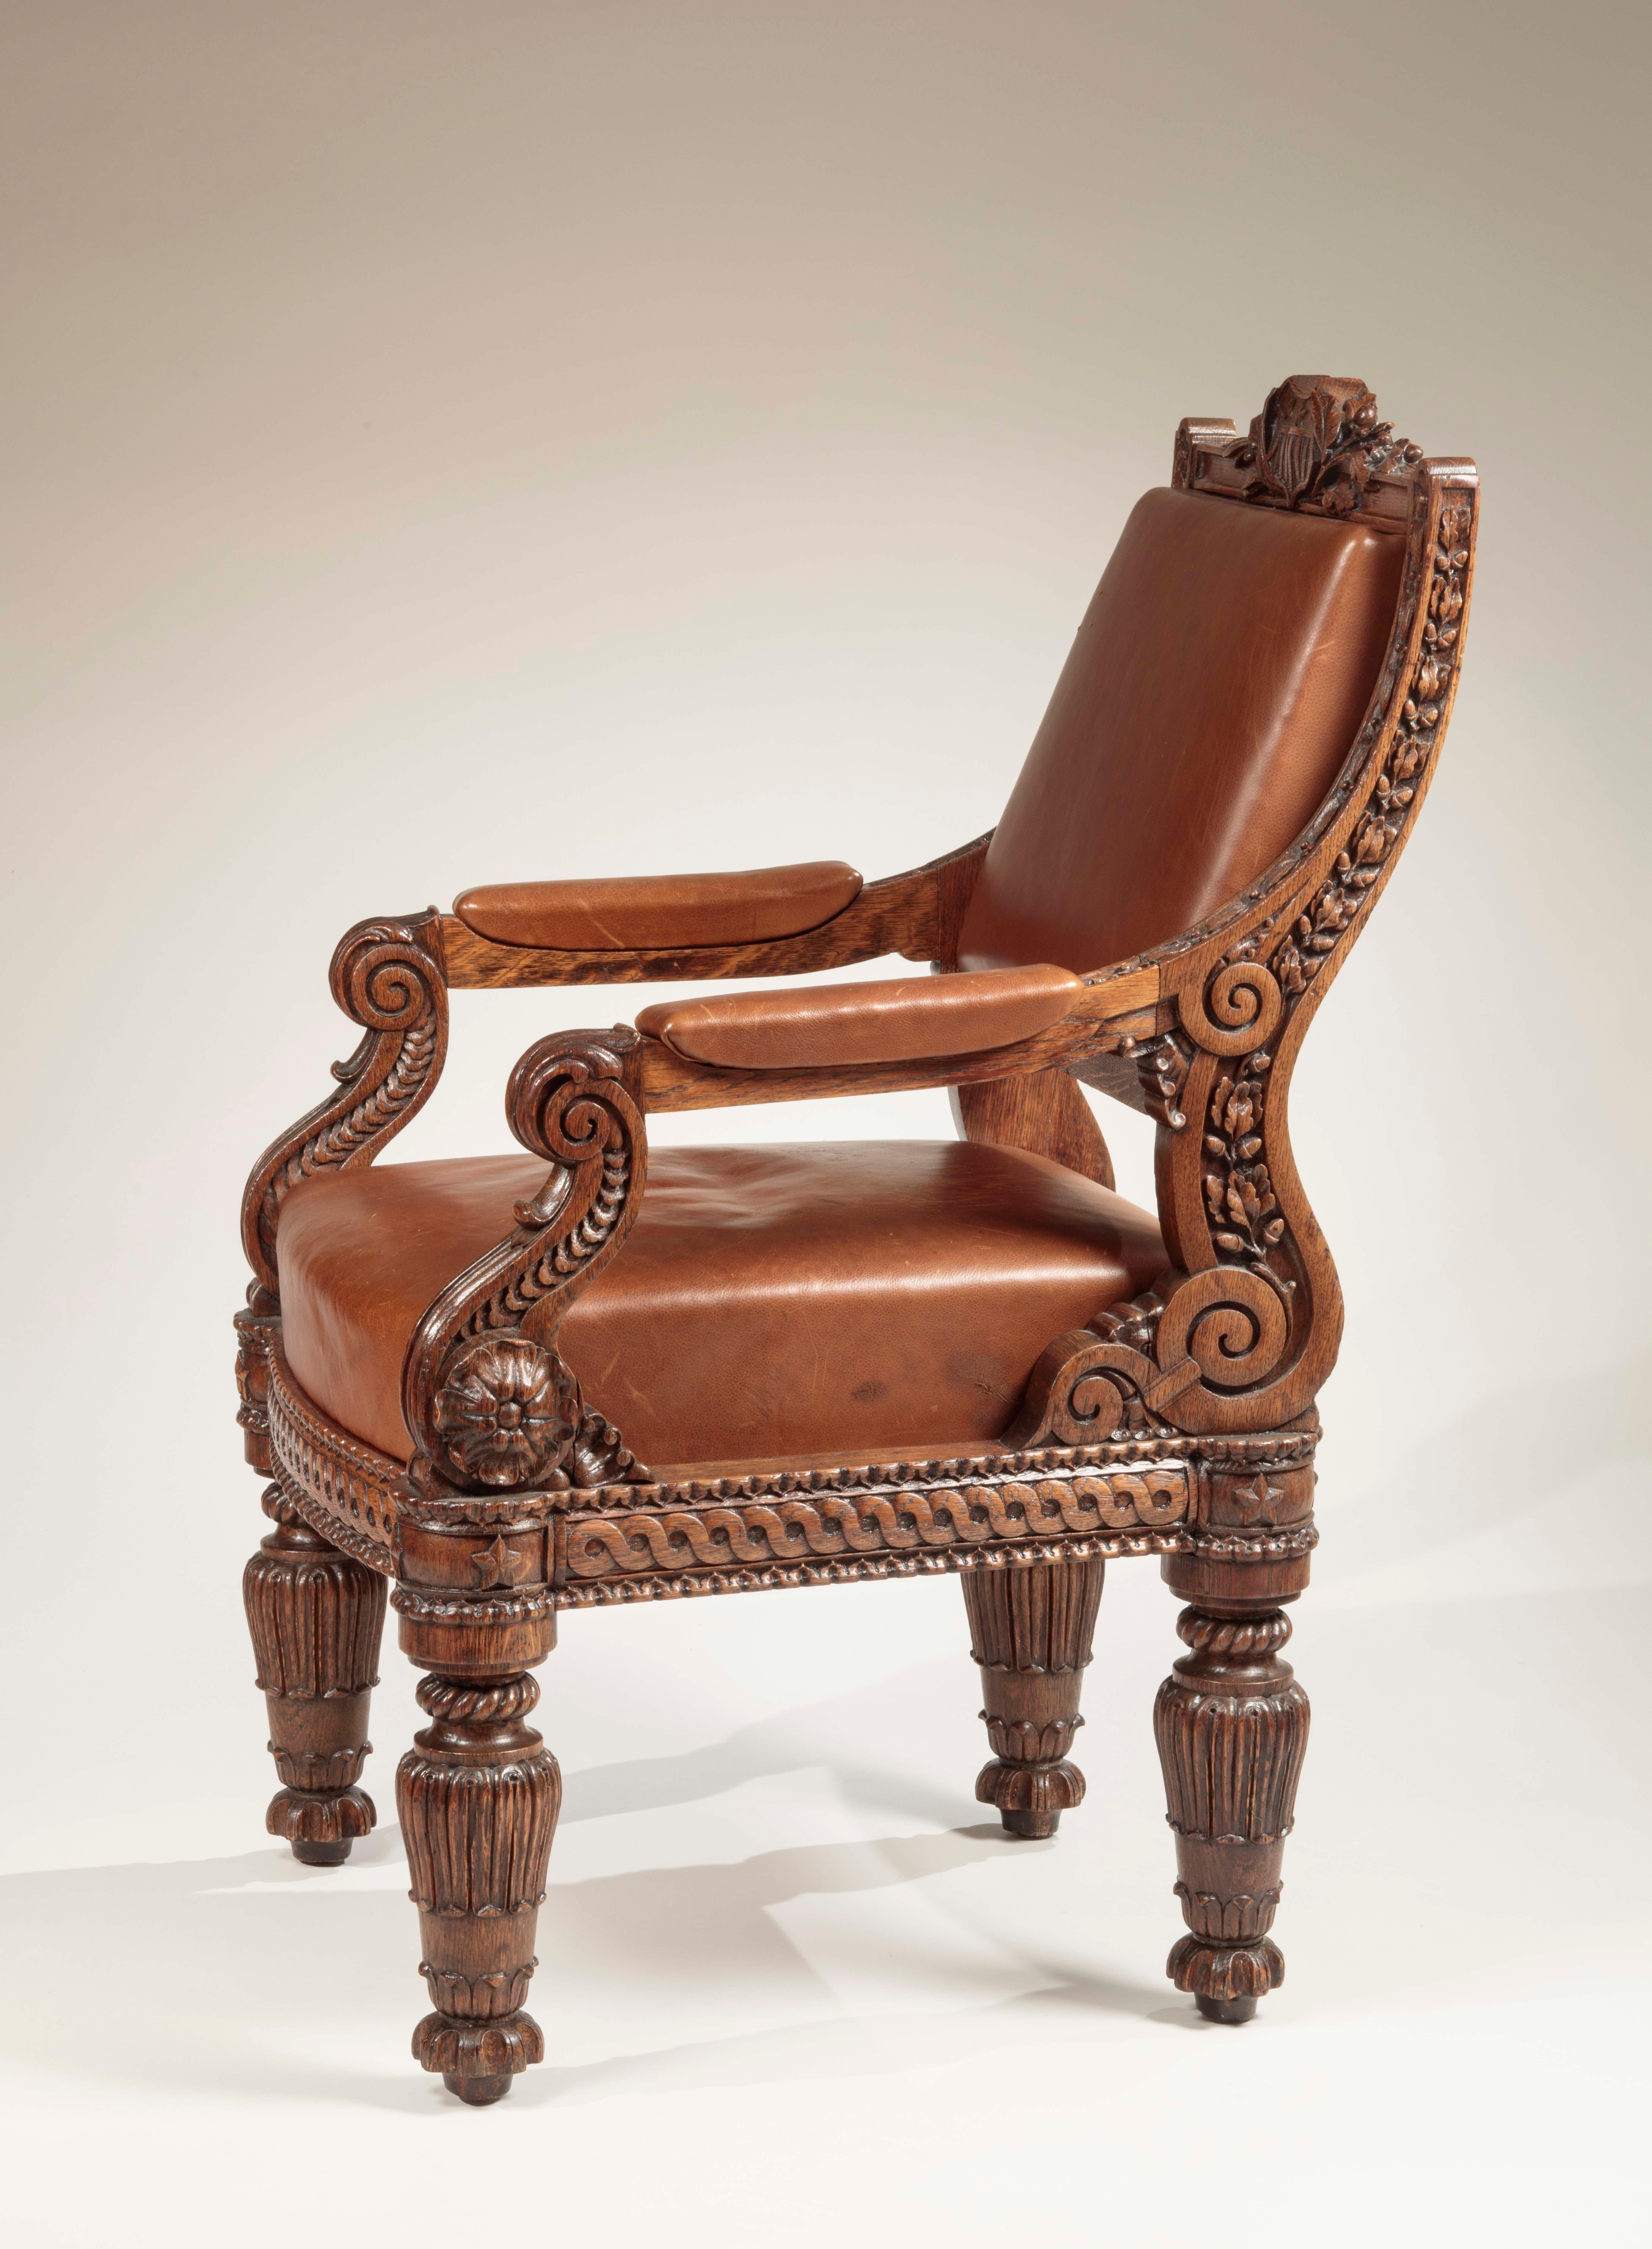 Important carved oak upholstered armchair
Made for the United States House of Representatives
Bembe & Kimbel (active 1850-1870), After Thomas U. Walter
New York, circa 1857

The bowed crest rail centering a carved United States shield with